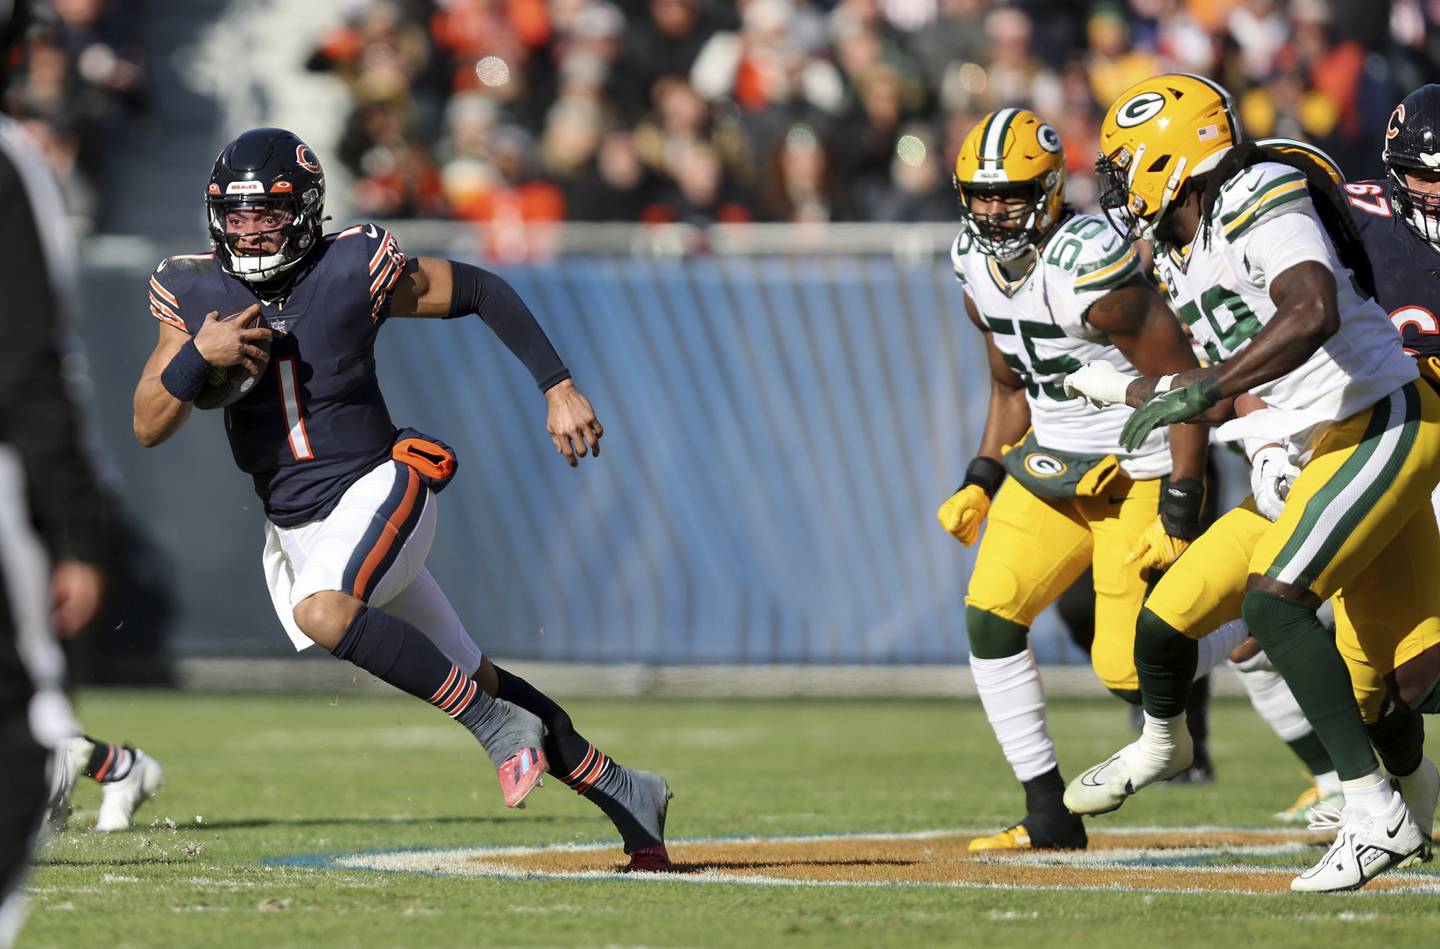 Bears quarterback Justin Fields breaks free for a long touchdown run in the first quarter against the Packers at Soldier Field on Dec. 4, 2022.